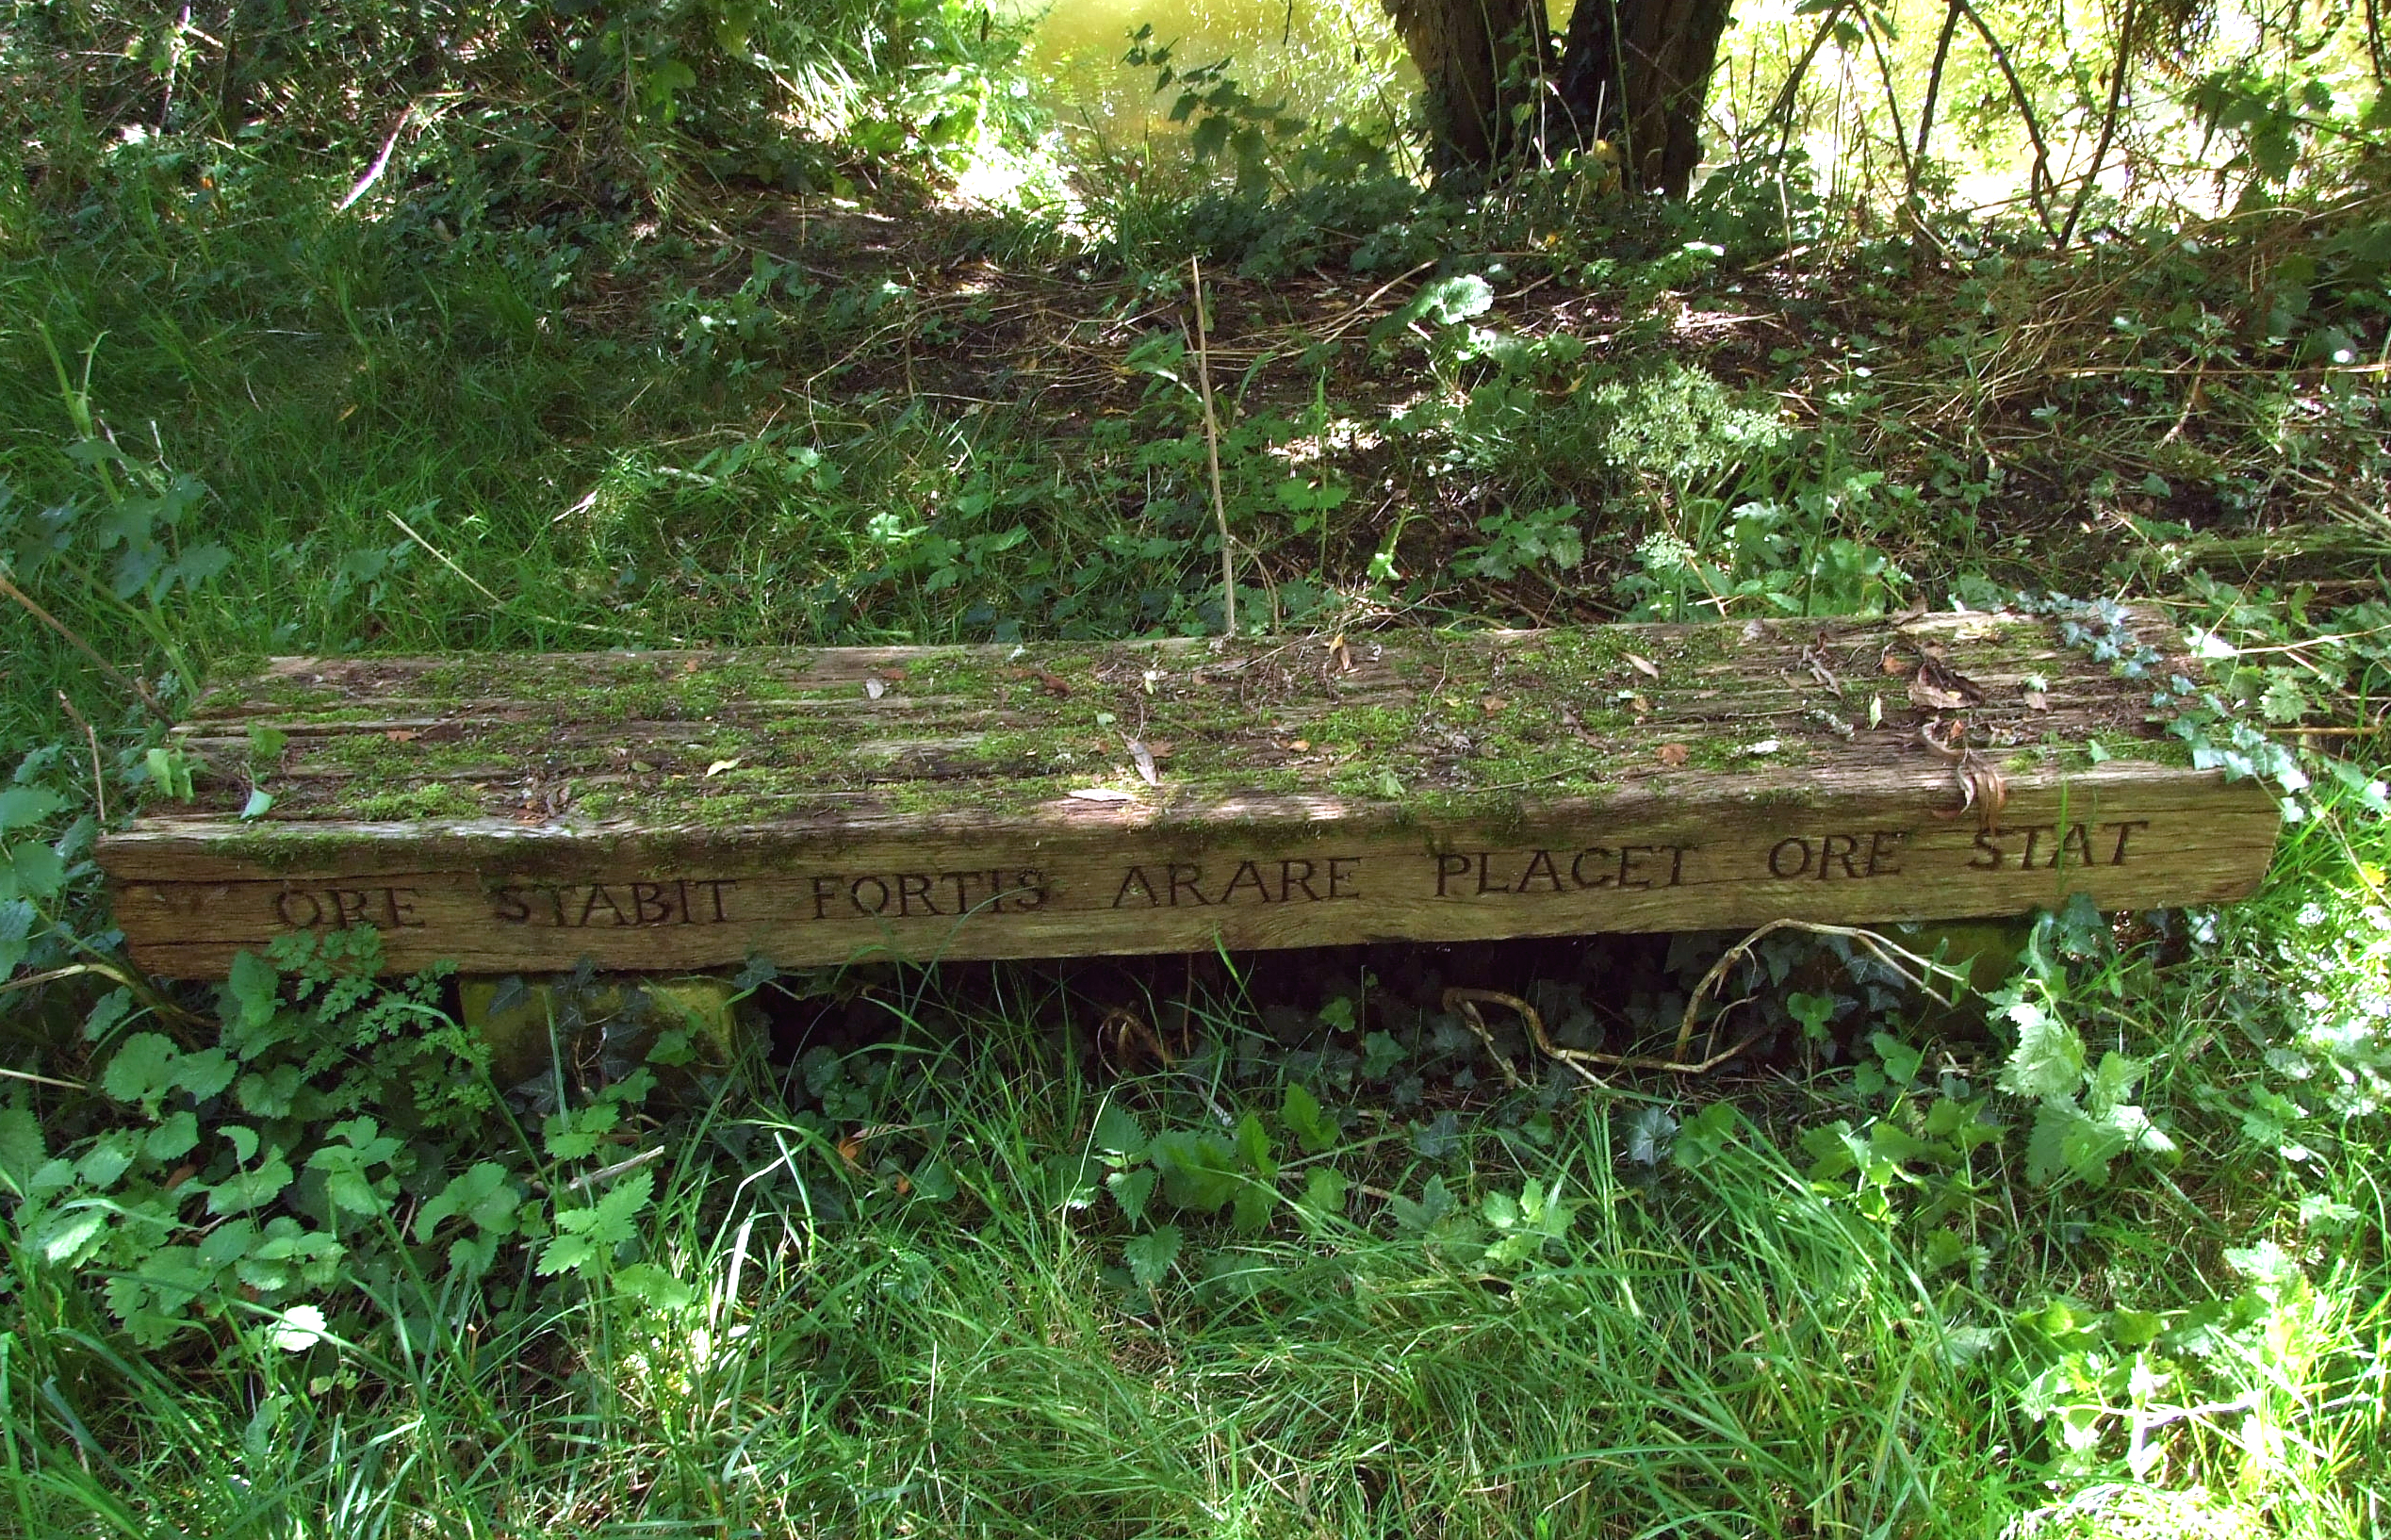 Photograph of a bench